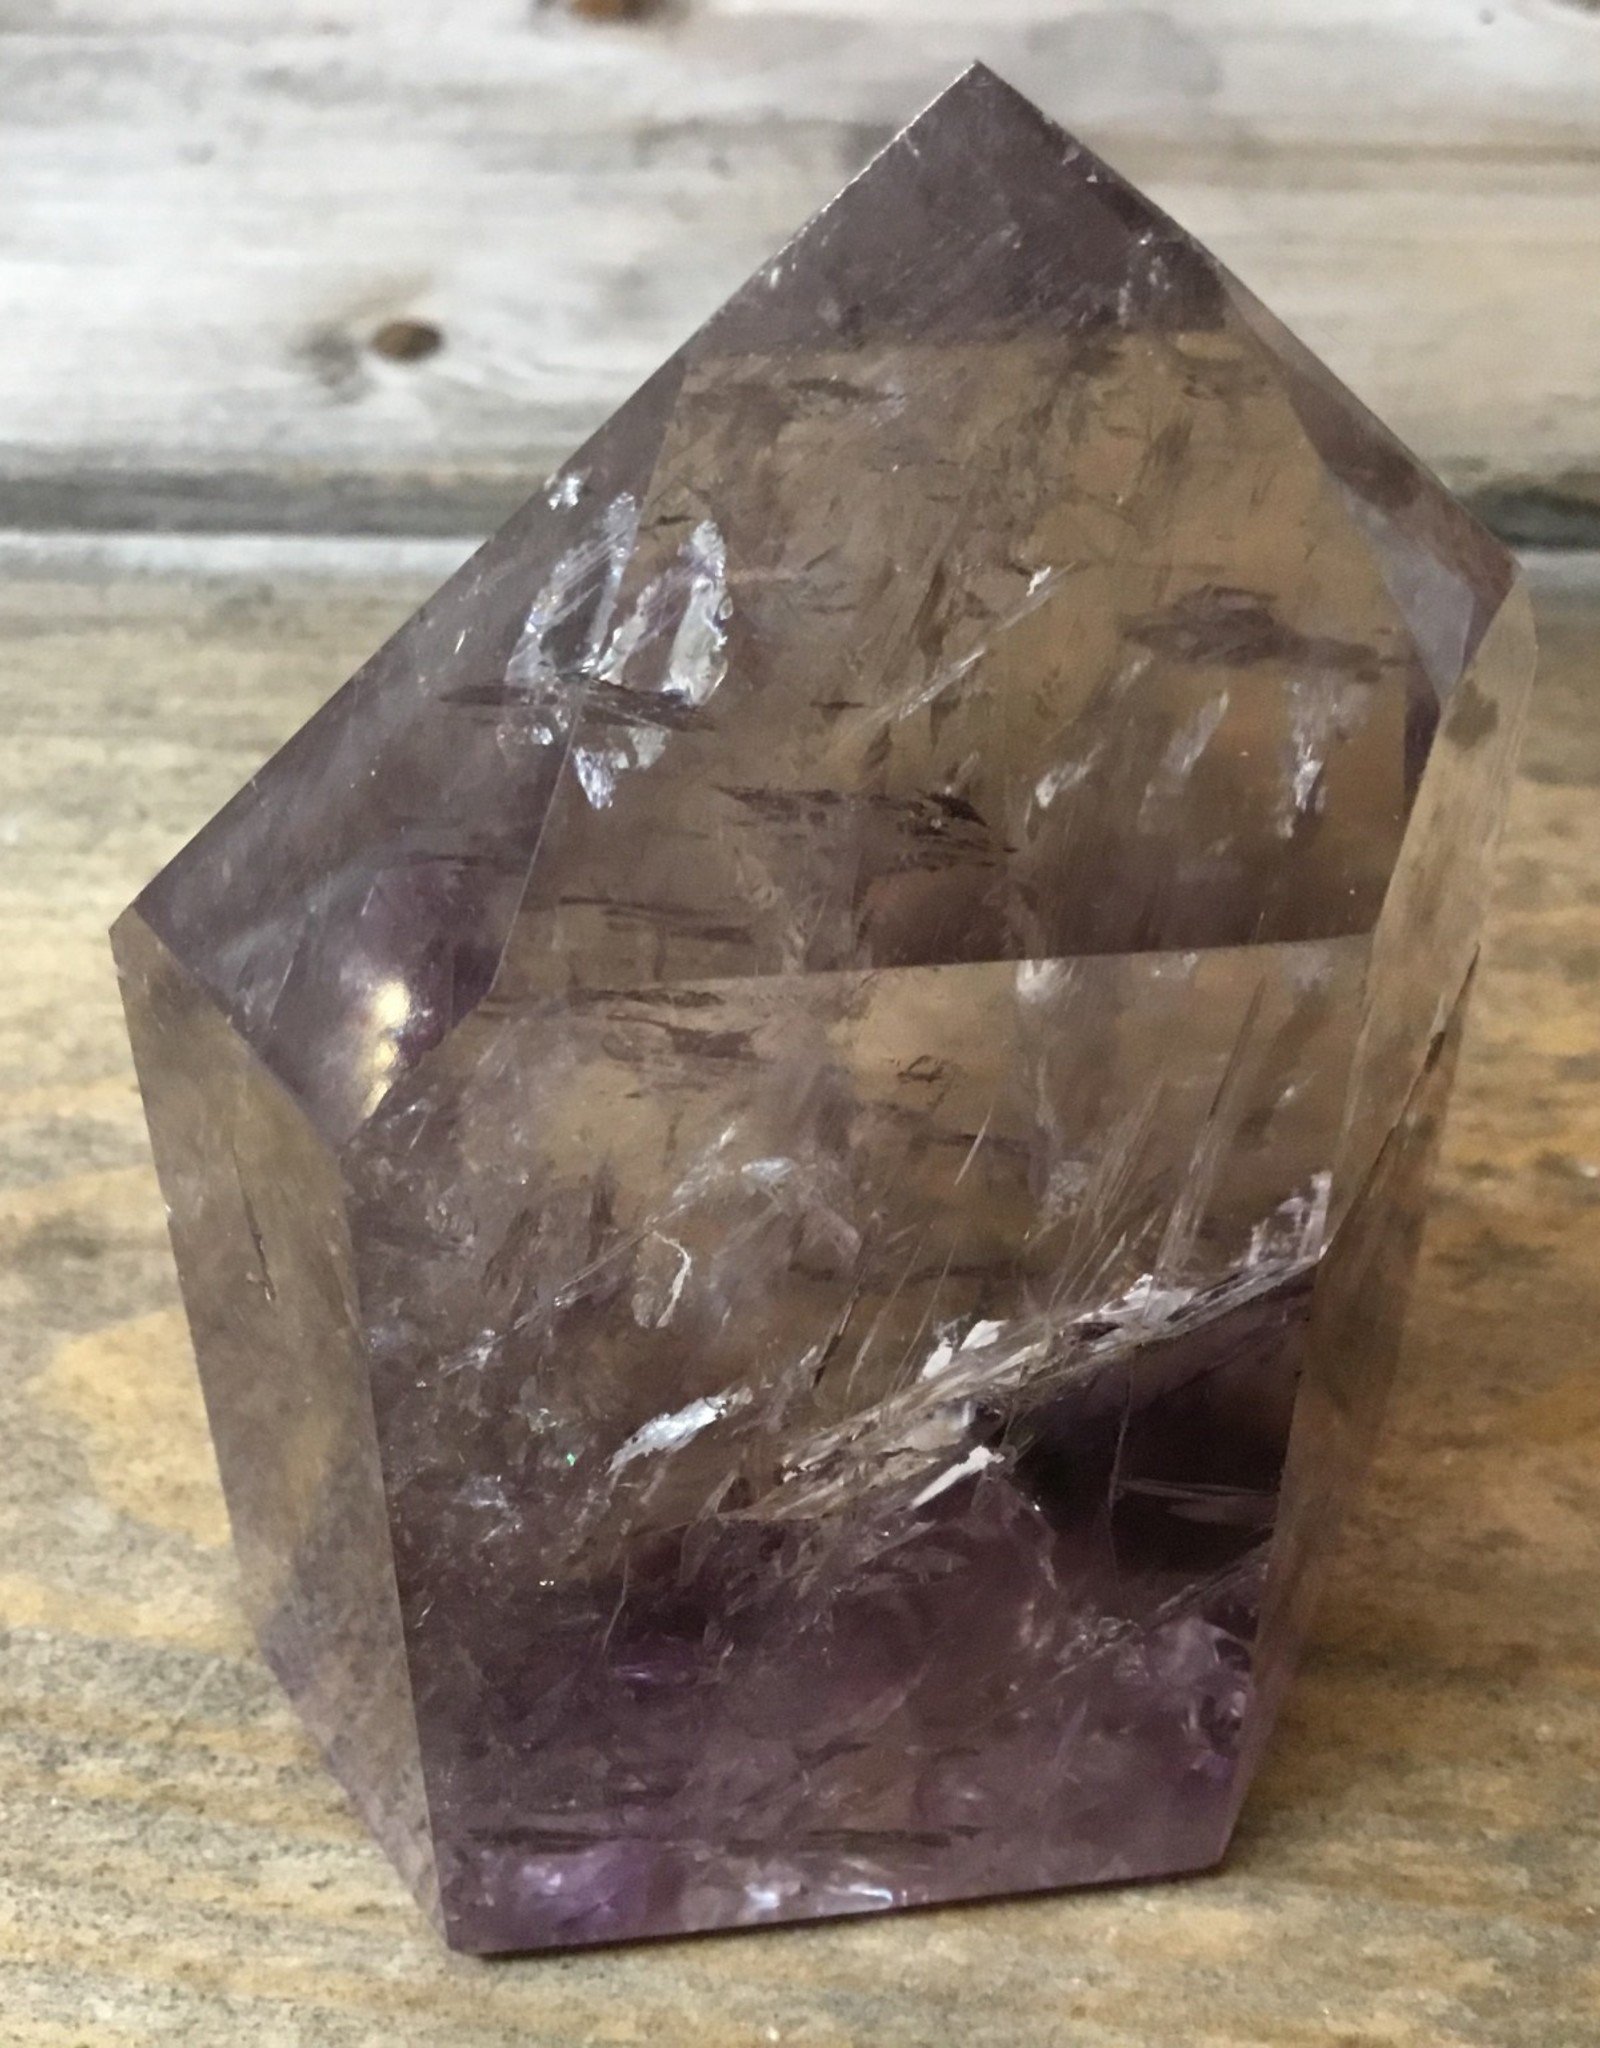 Large Clear Amethyst Polished Point